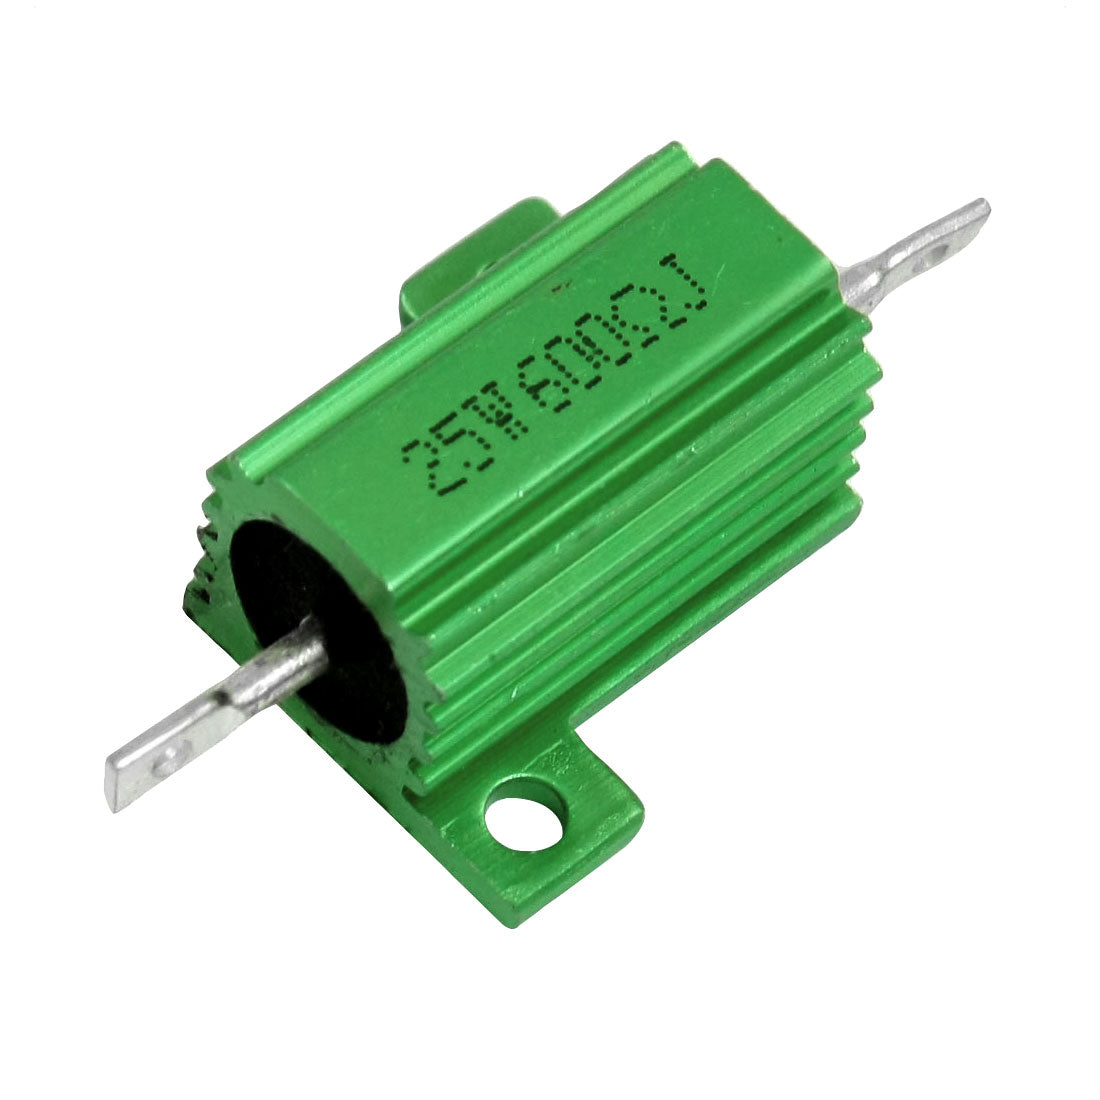 uxcell Uxcell 5% 600 Ohm 25 Watt Green Aluminum Housed Clad Wirewound Resistor